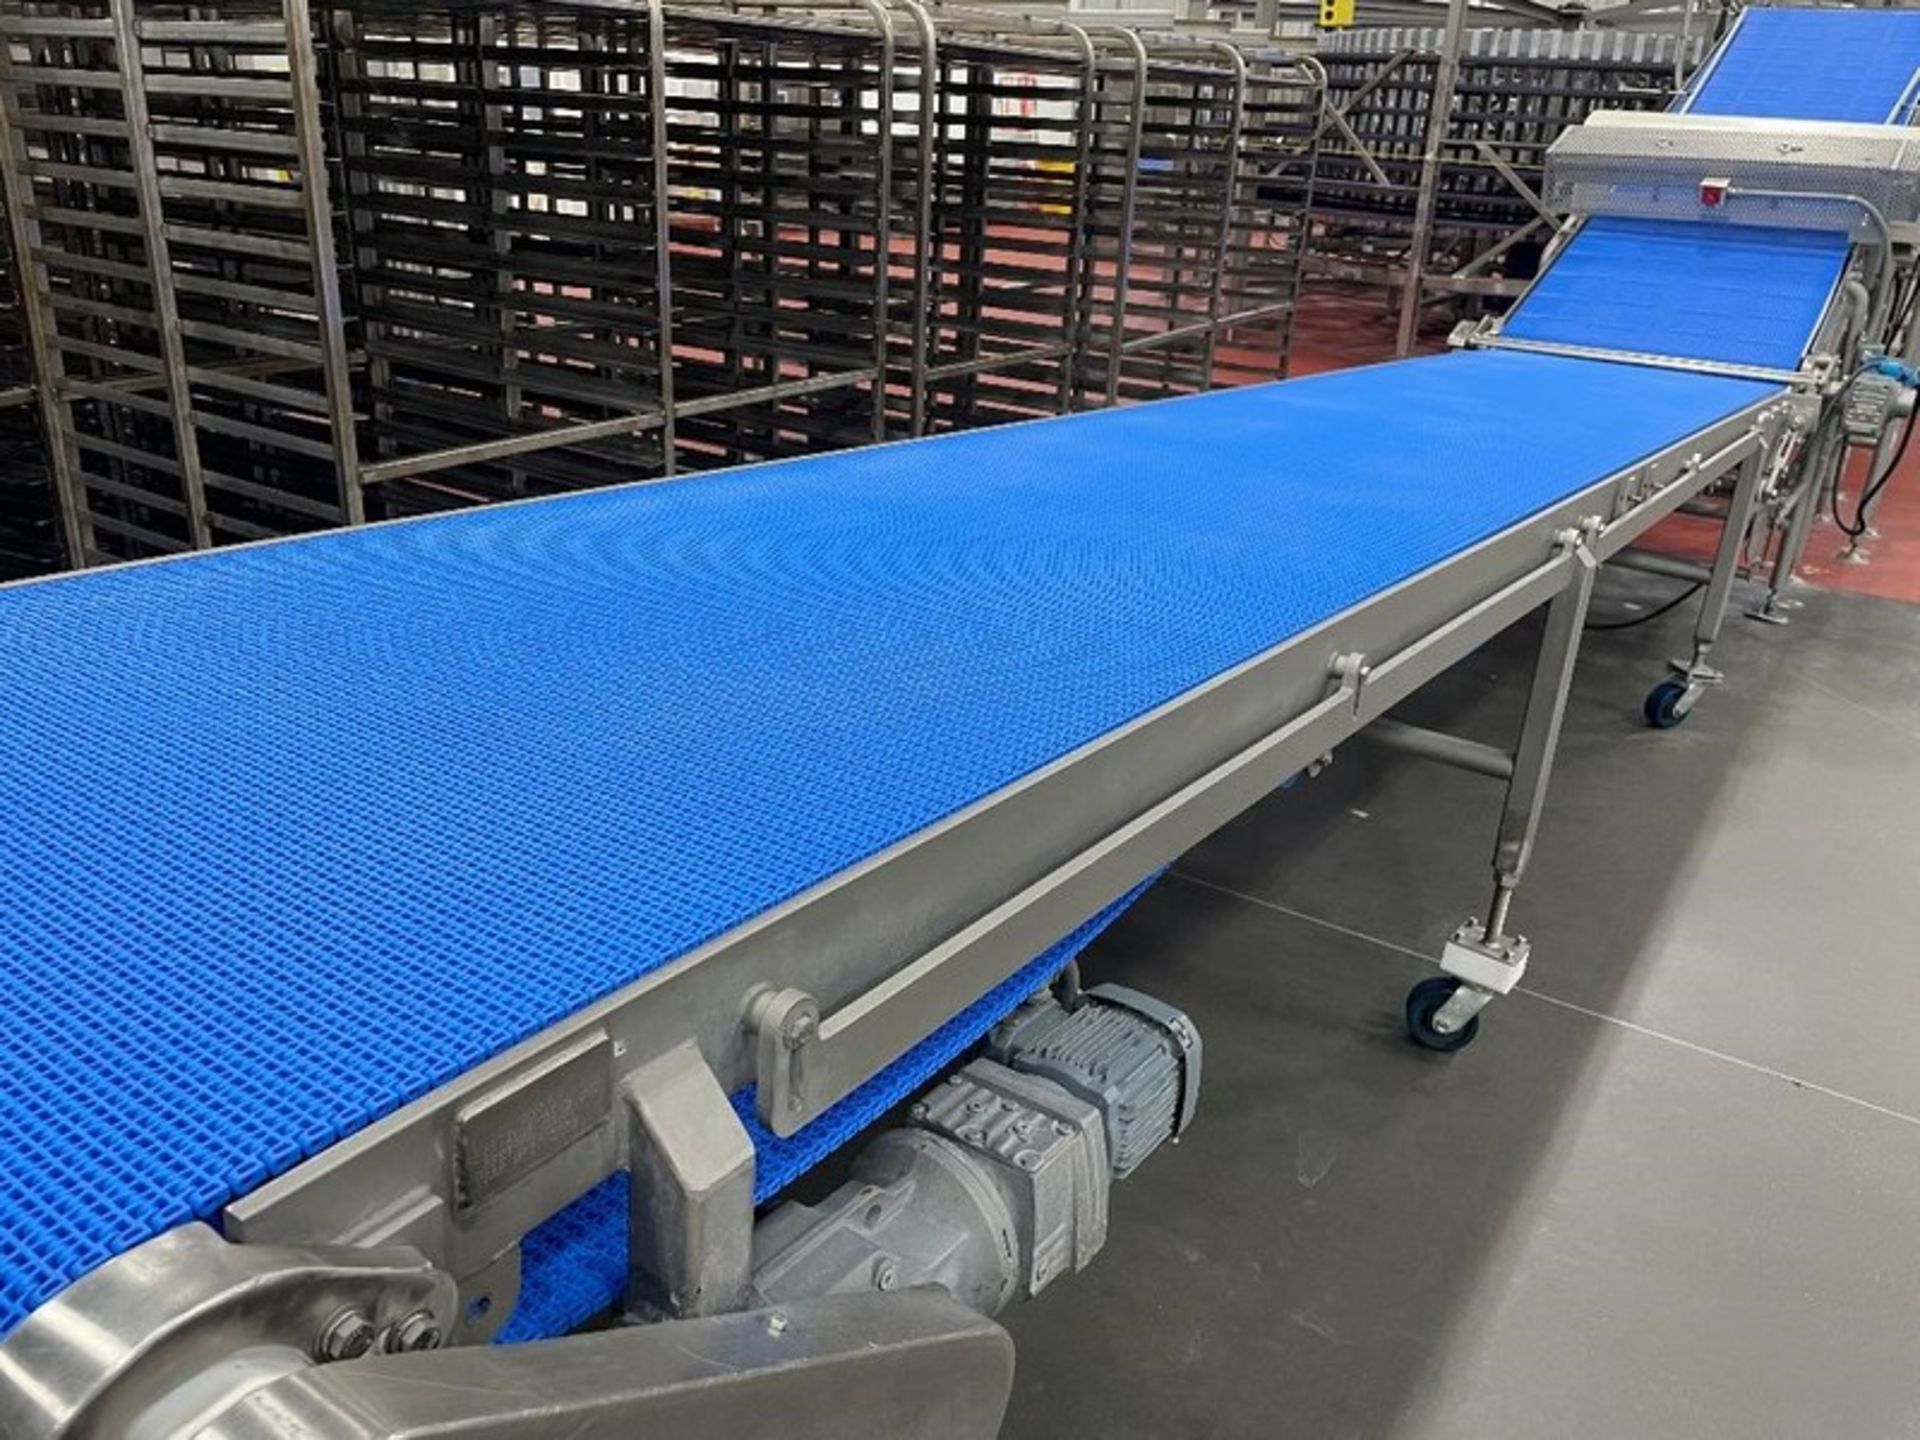 Kofab S/S Blue Belt Intralox Conveyor, Aprox. 36" W x 17 ft. Long, Complete with SEW Drive Motor,